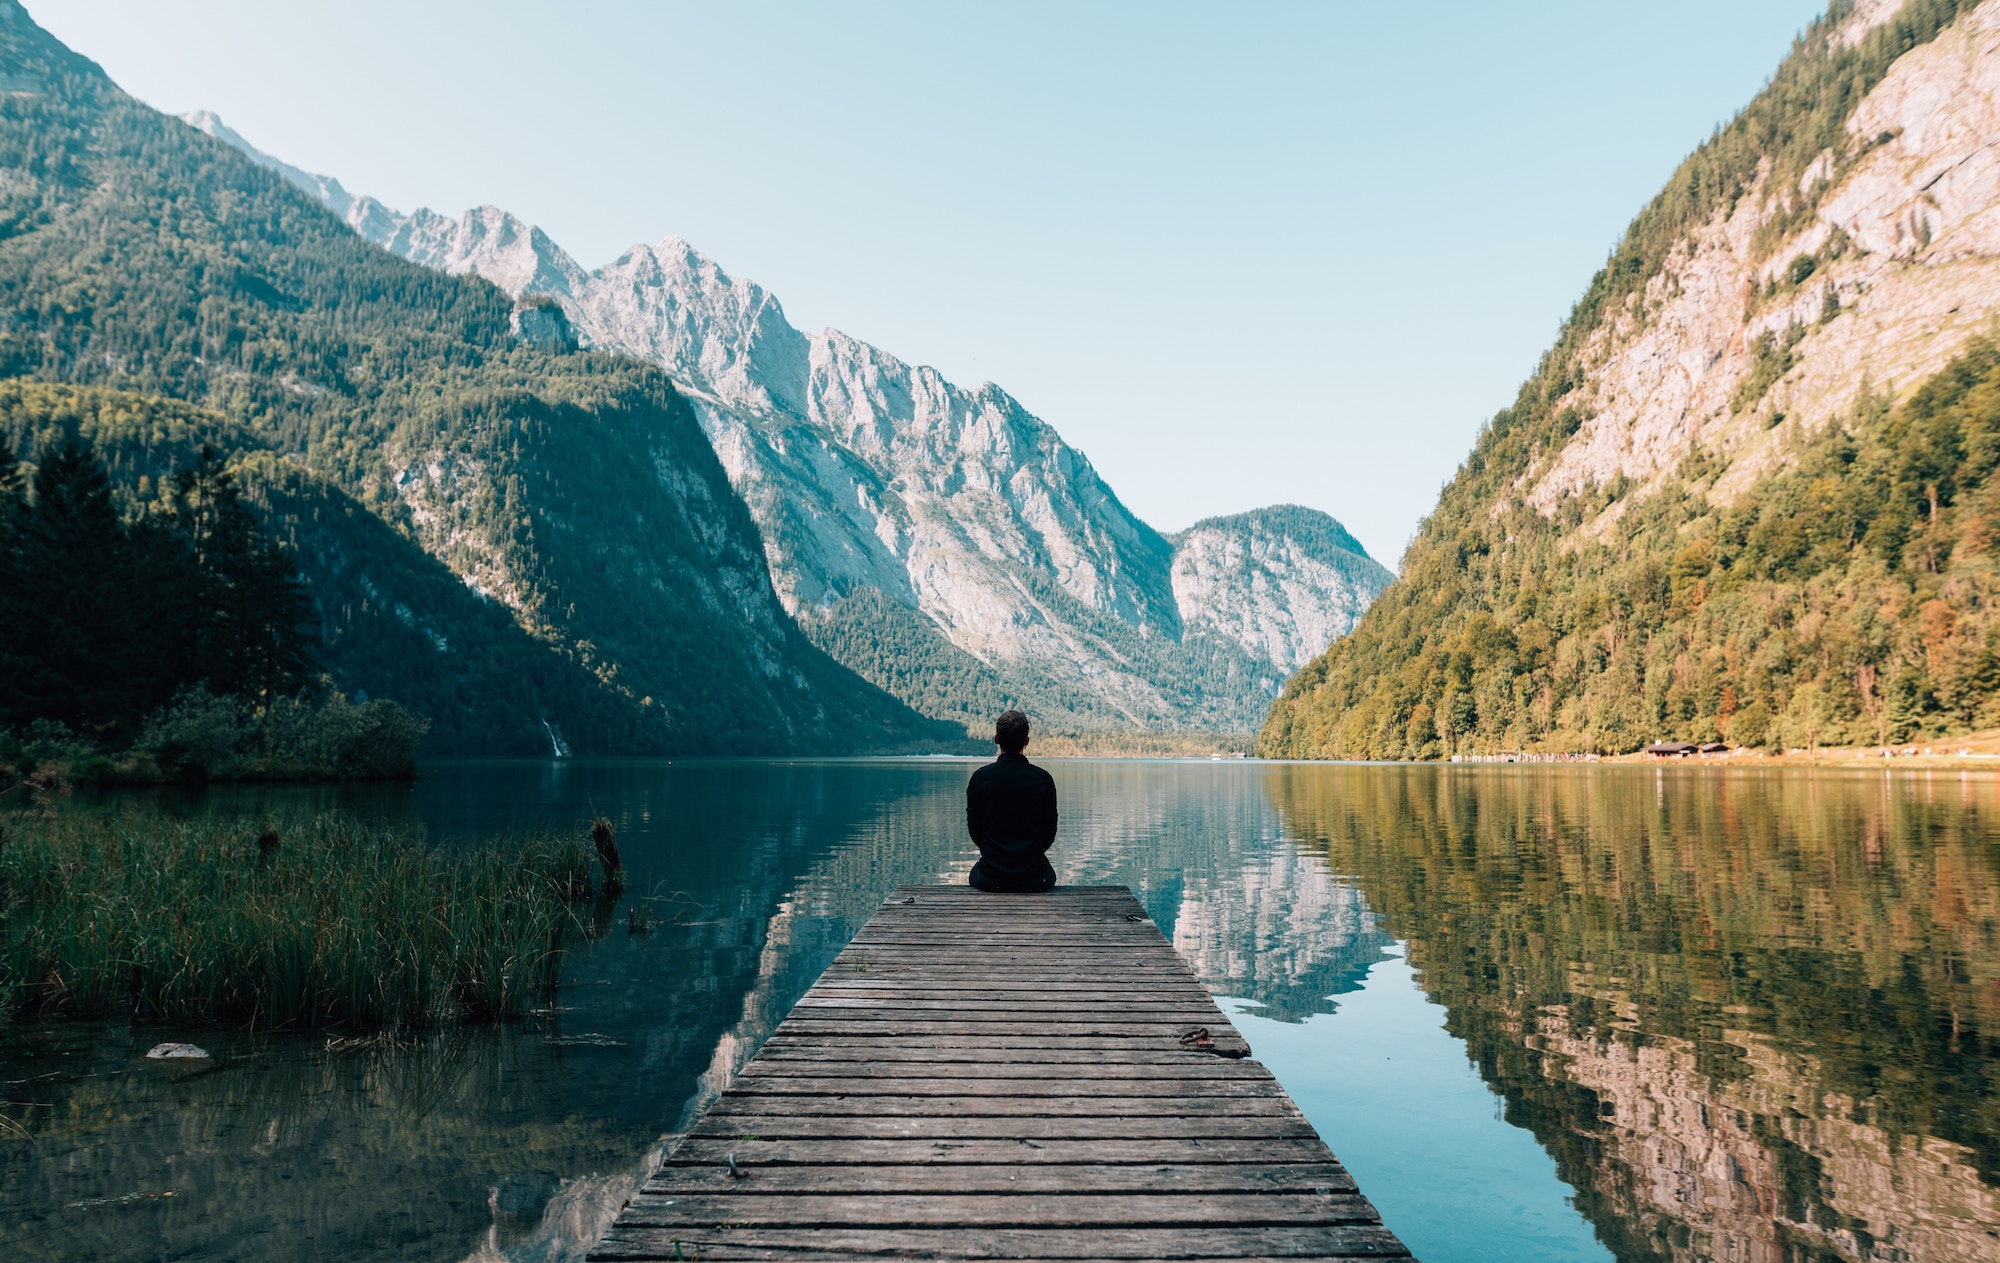 A man sitting on a dock in a serene mountain lake